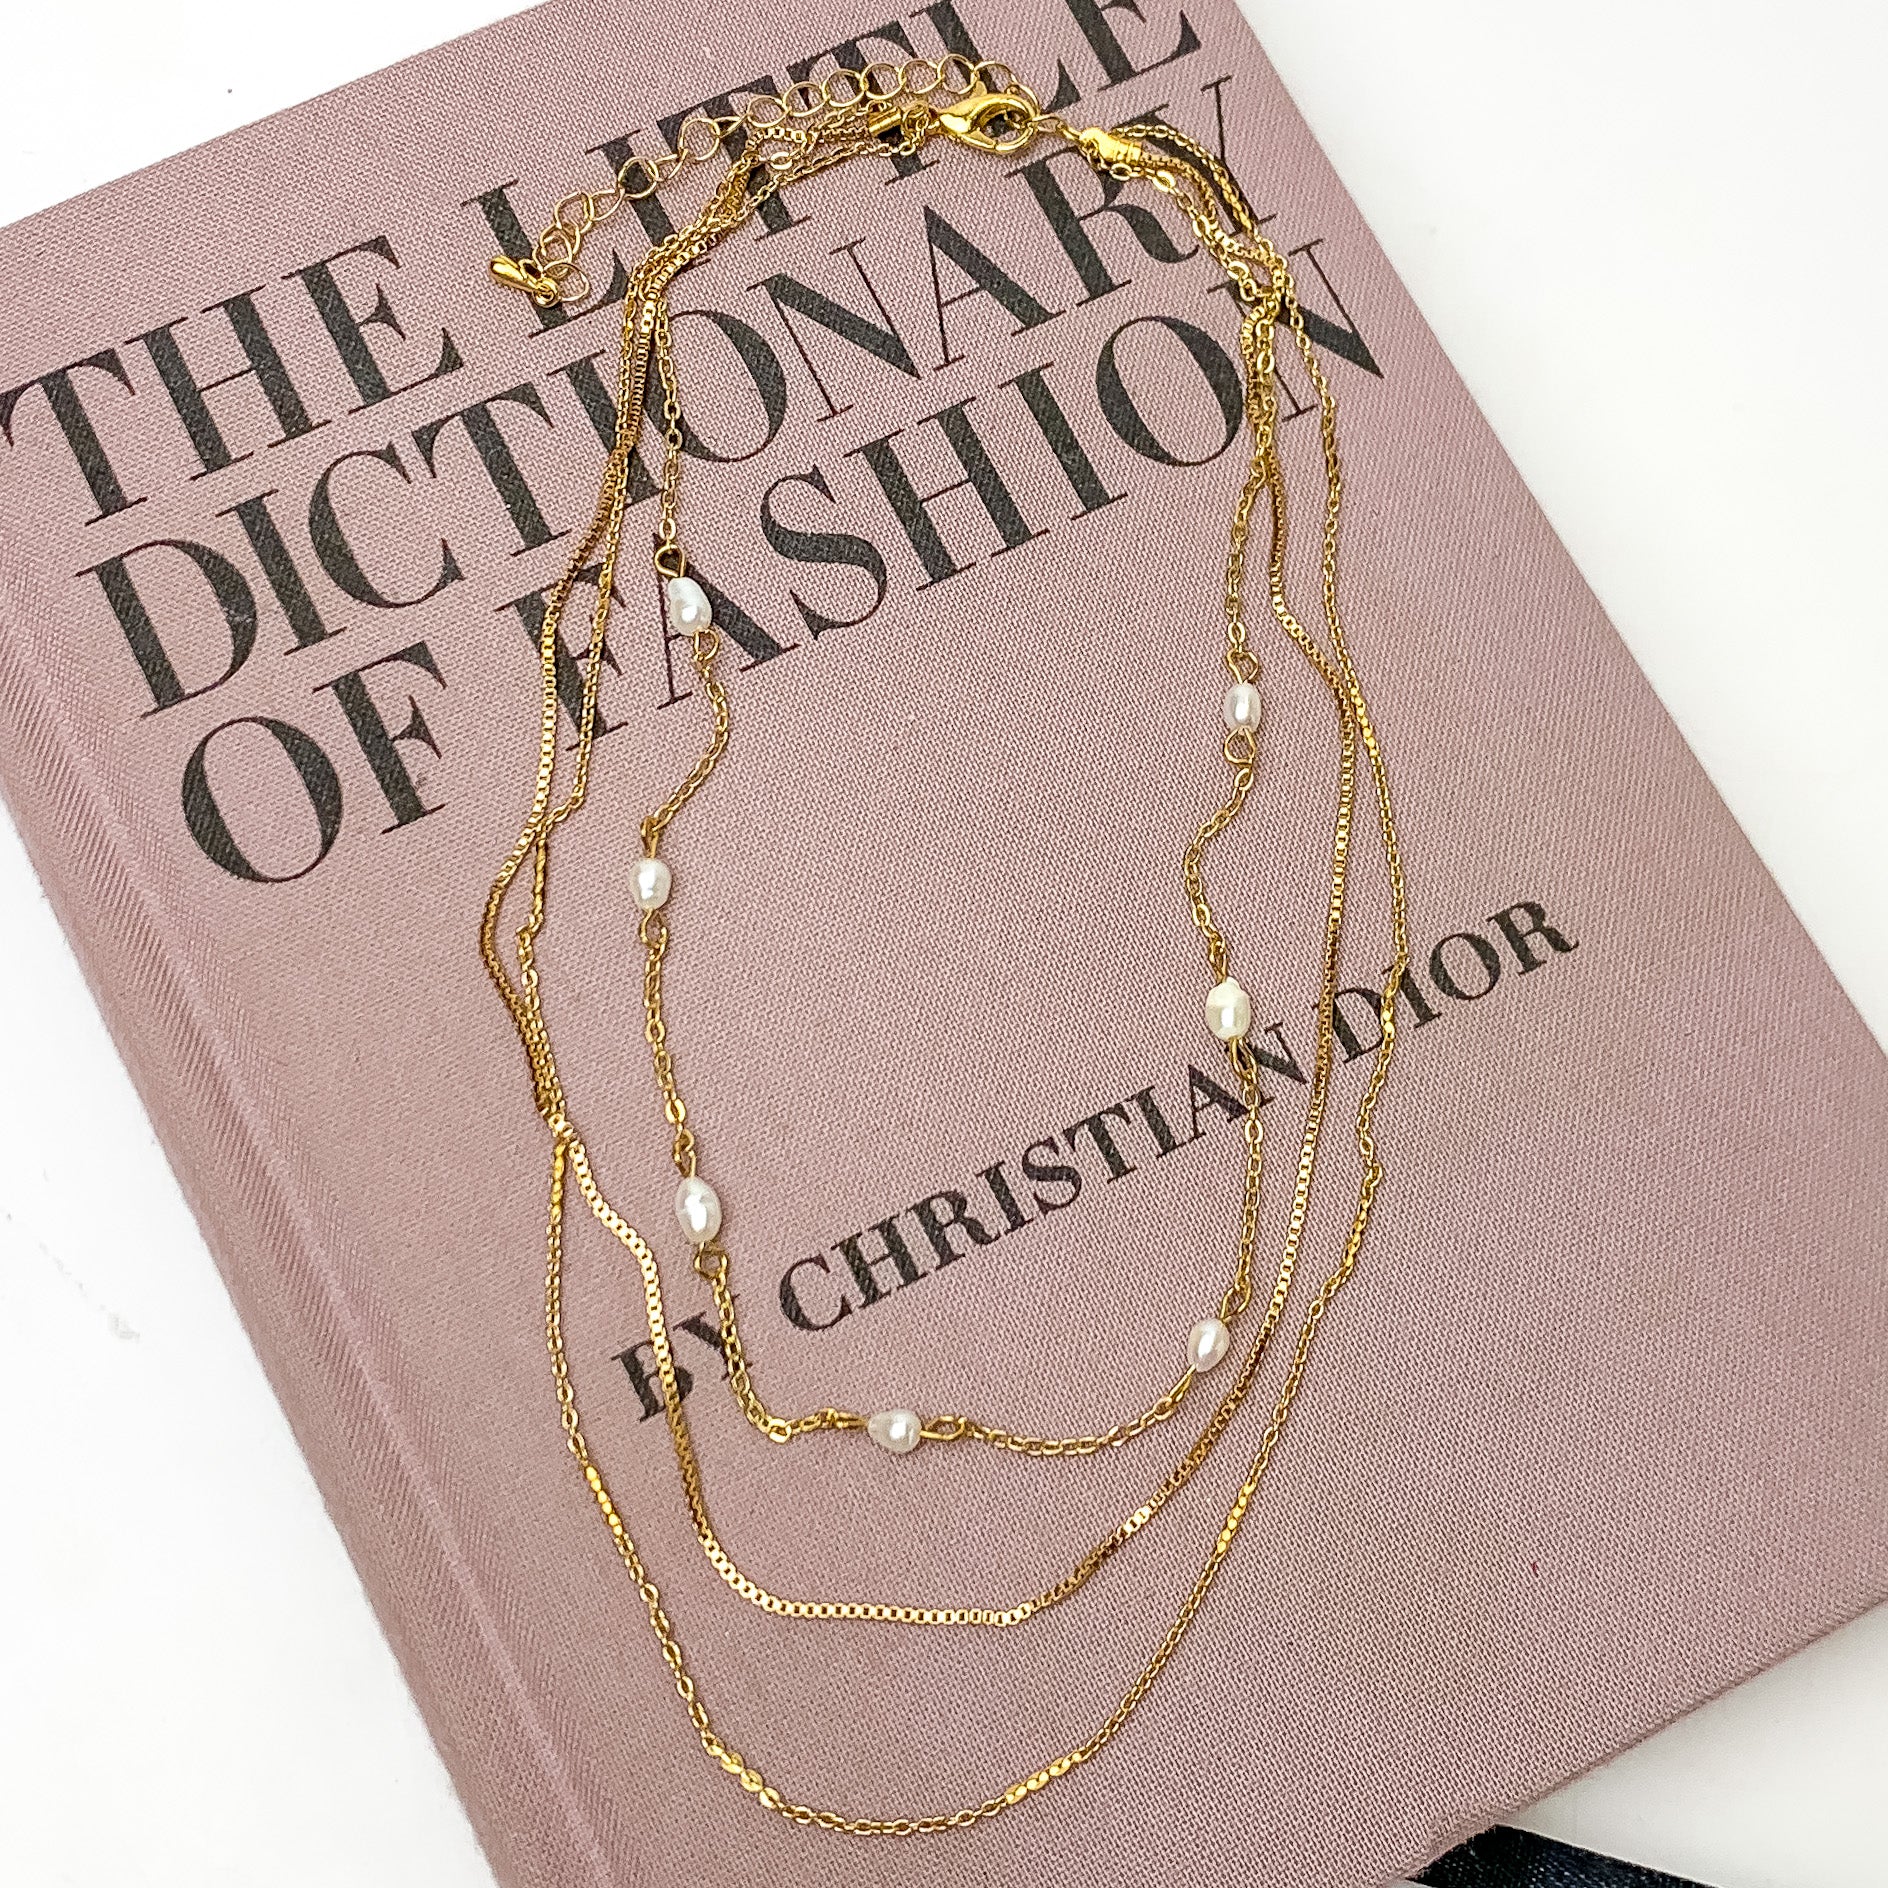 Three Strand Gold Tone Necklace With Pearl Accents. Pictured on a white background with the necklace laying on a pink book.